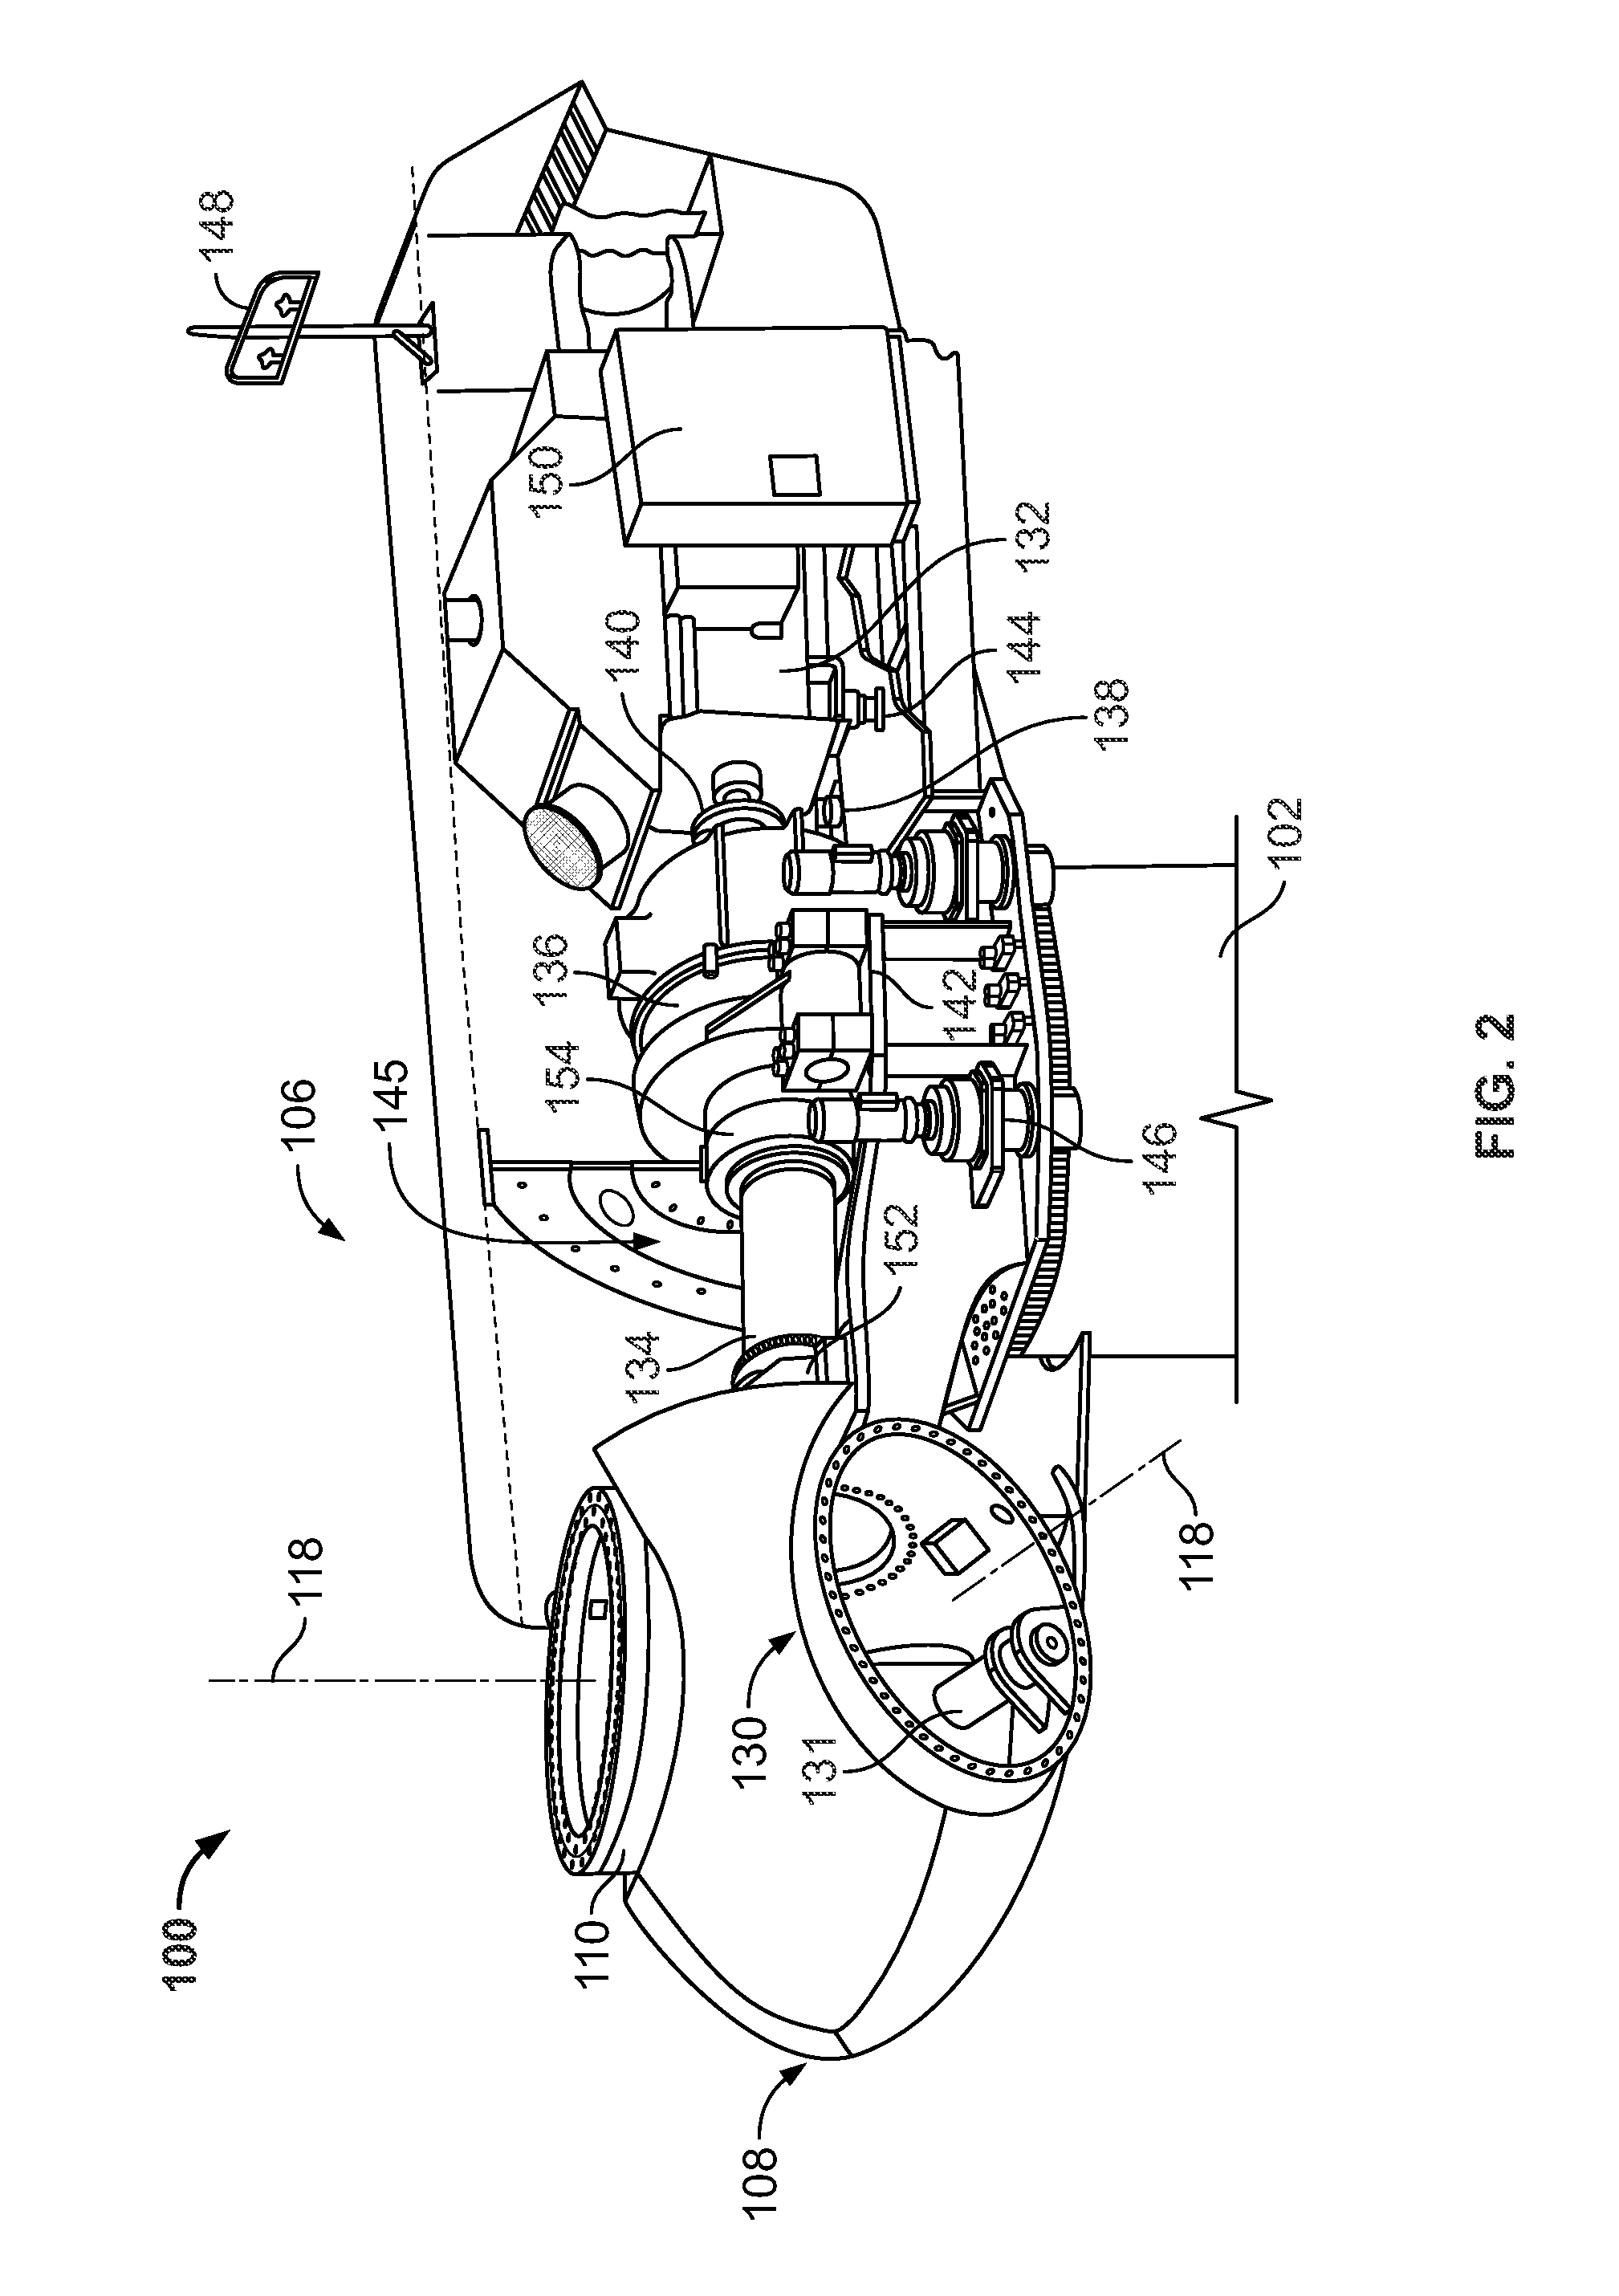 Systems and methods for assembling a pitch assembly for use in a wind turbine